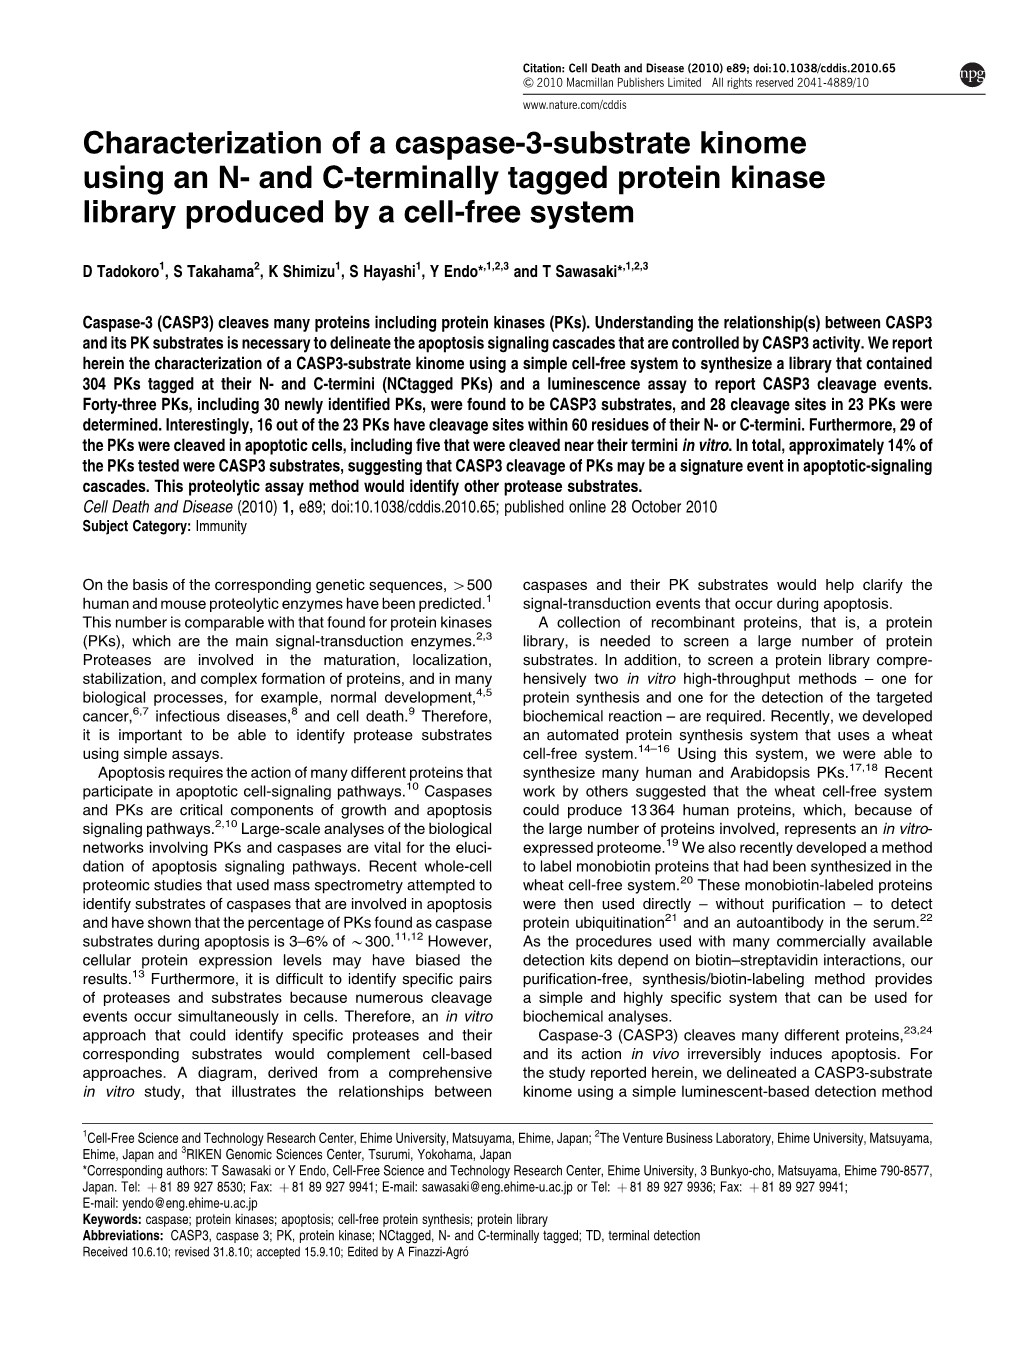 Characterization of a Caspase-3-Substrate Kinome Using an N-And C-Terminally Tagged Protein Kinase Library Produced by a Cell-Free System